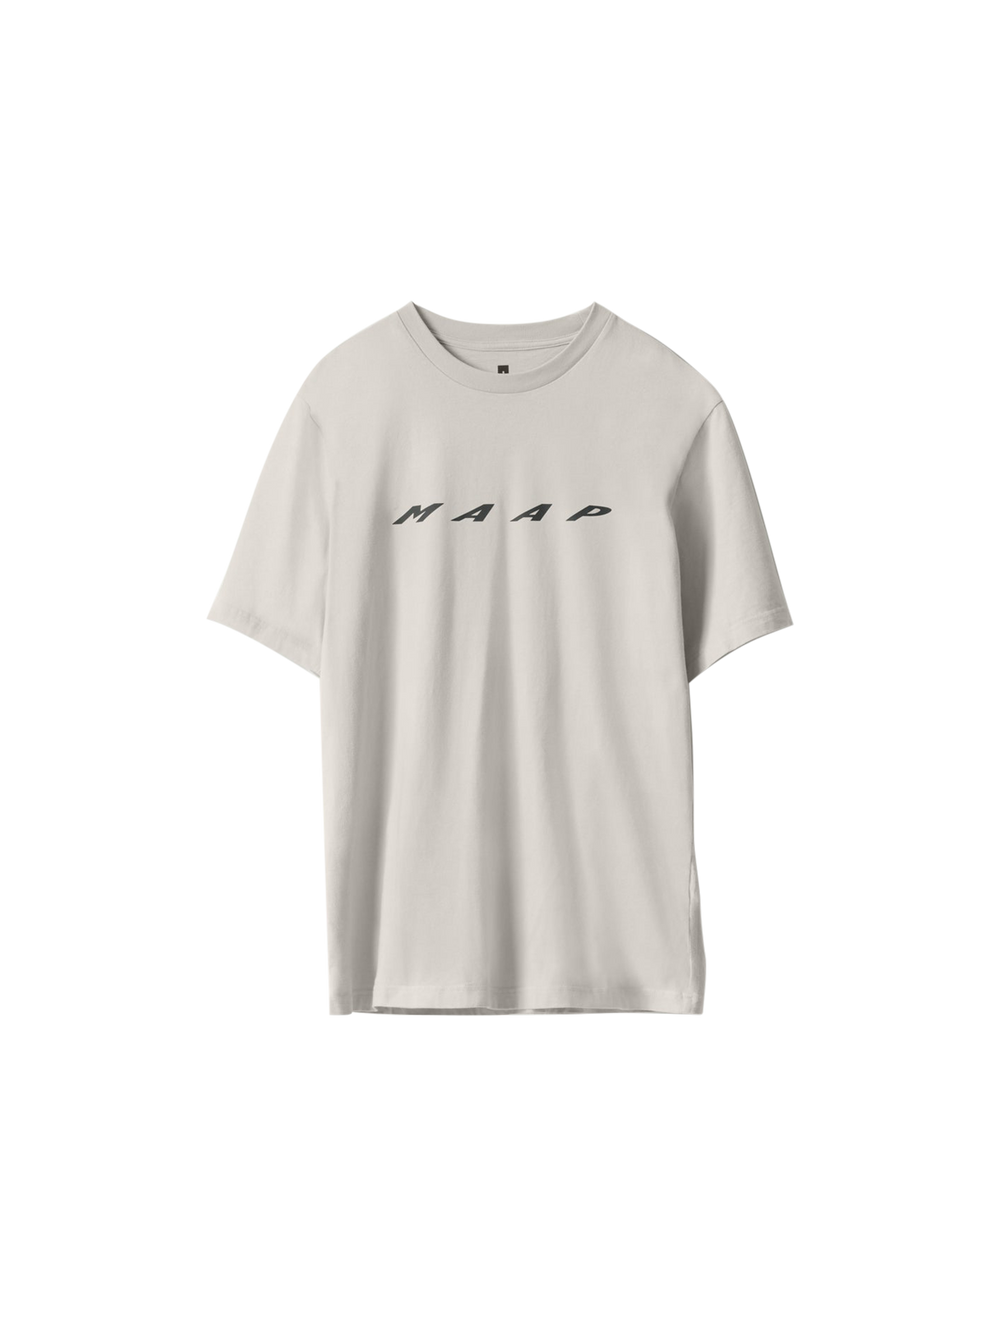 Product Image for Evade Tee